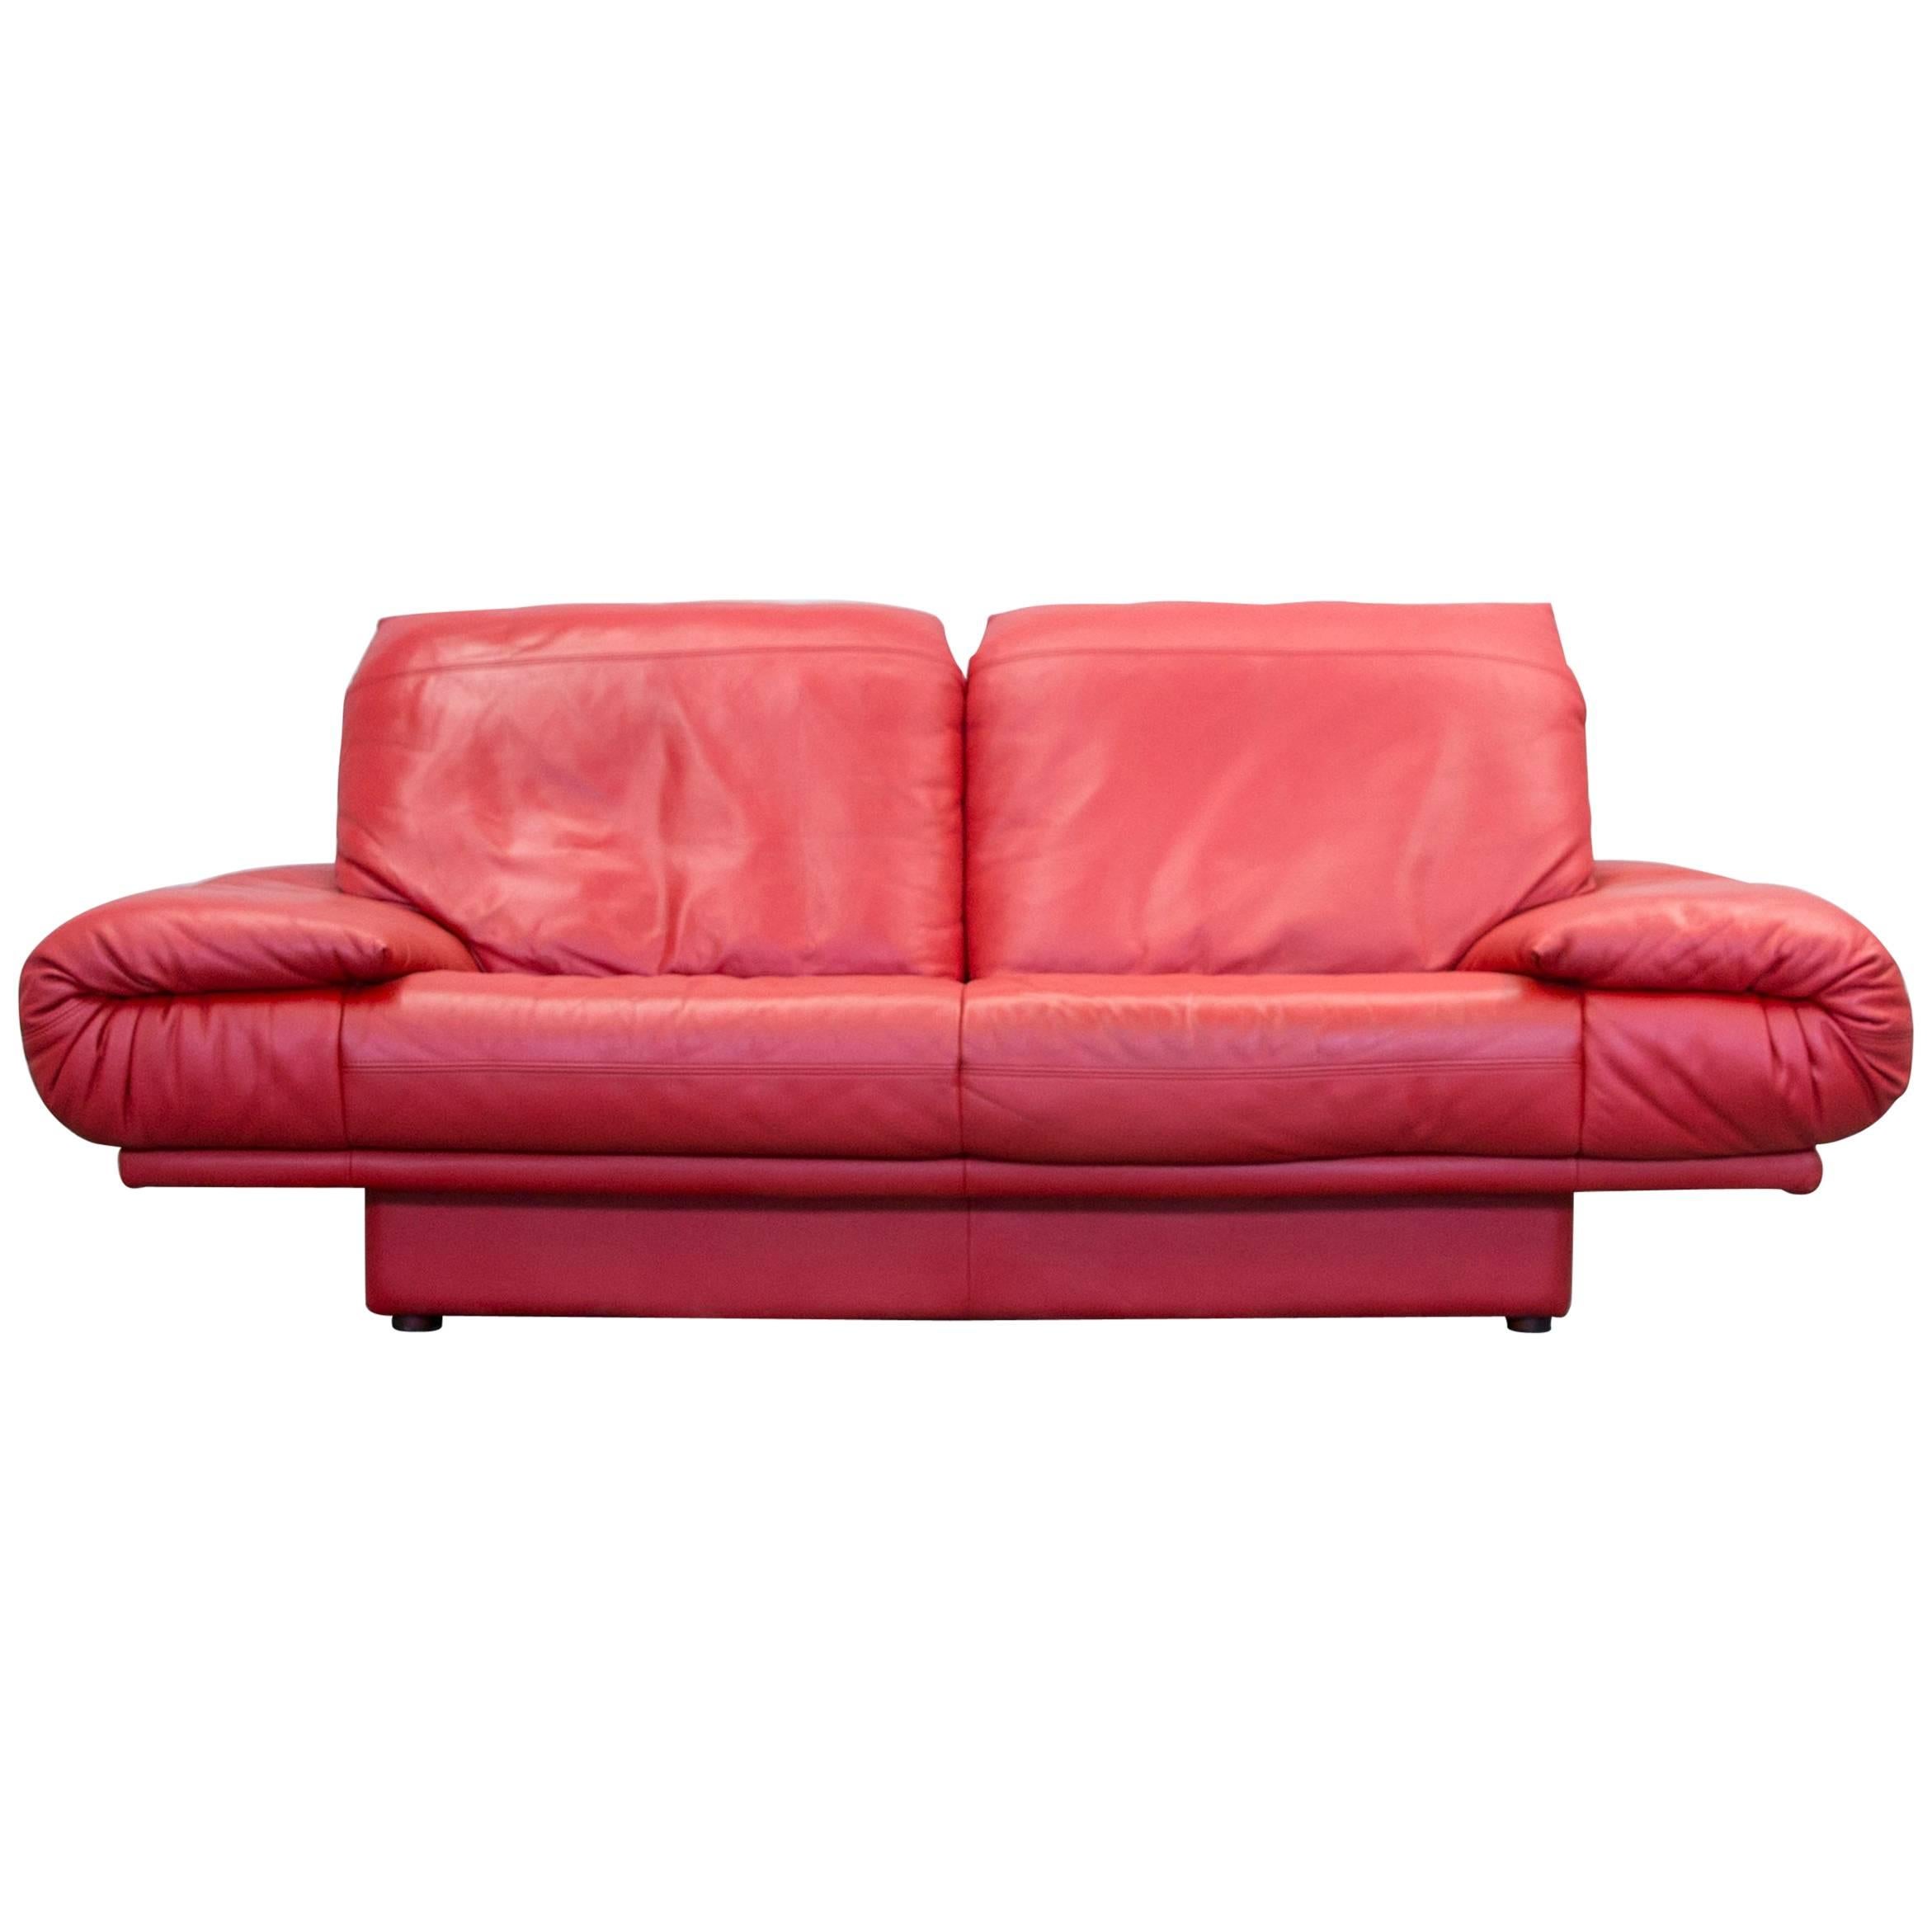 Rolf Benz Designer Leather Sofa Two-Seat Couch, Red Leather, Modern